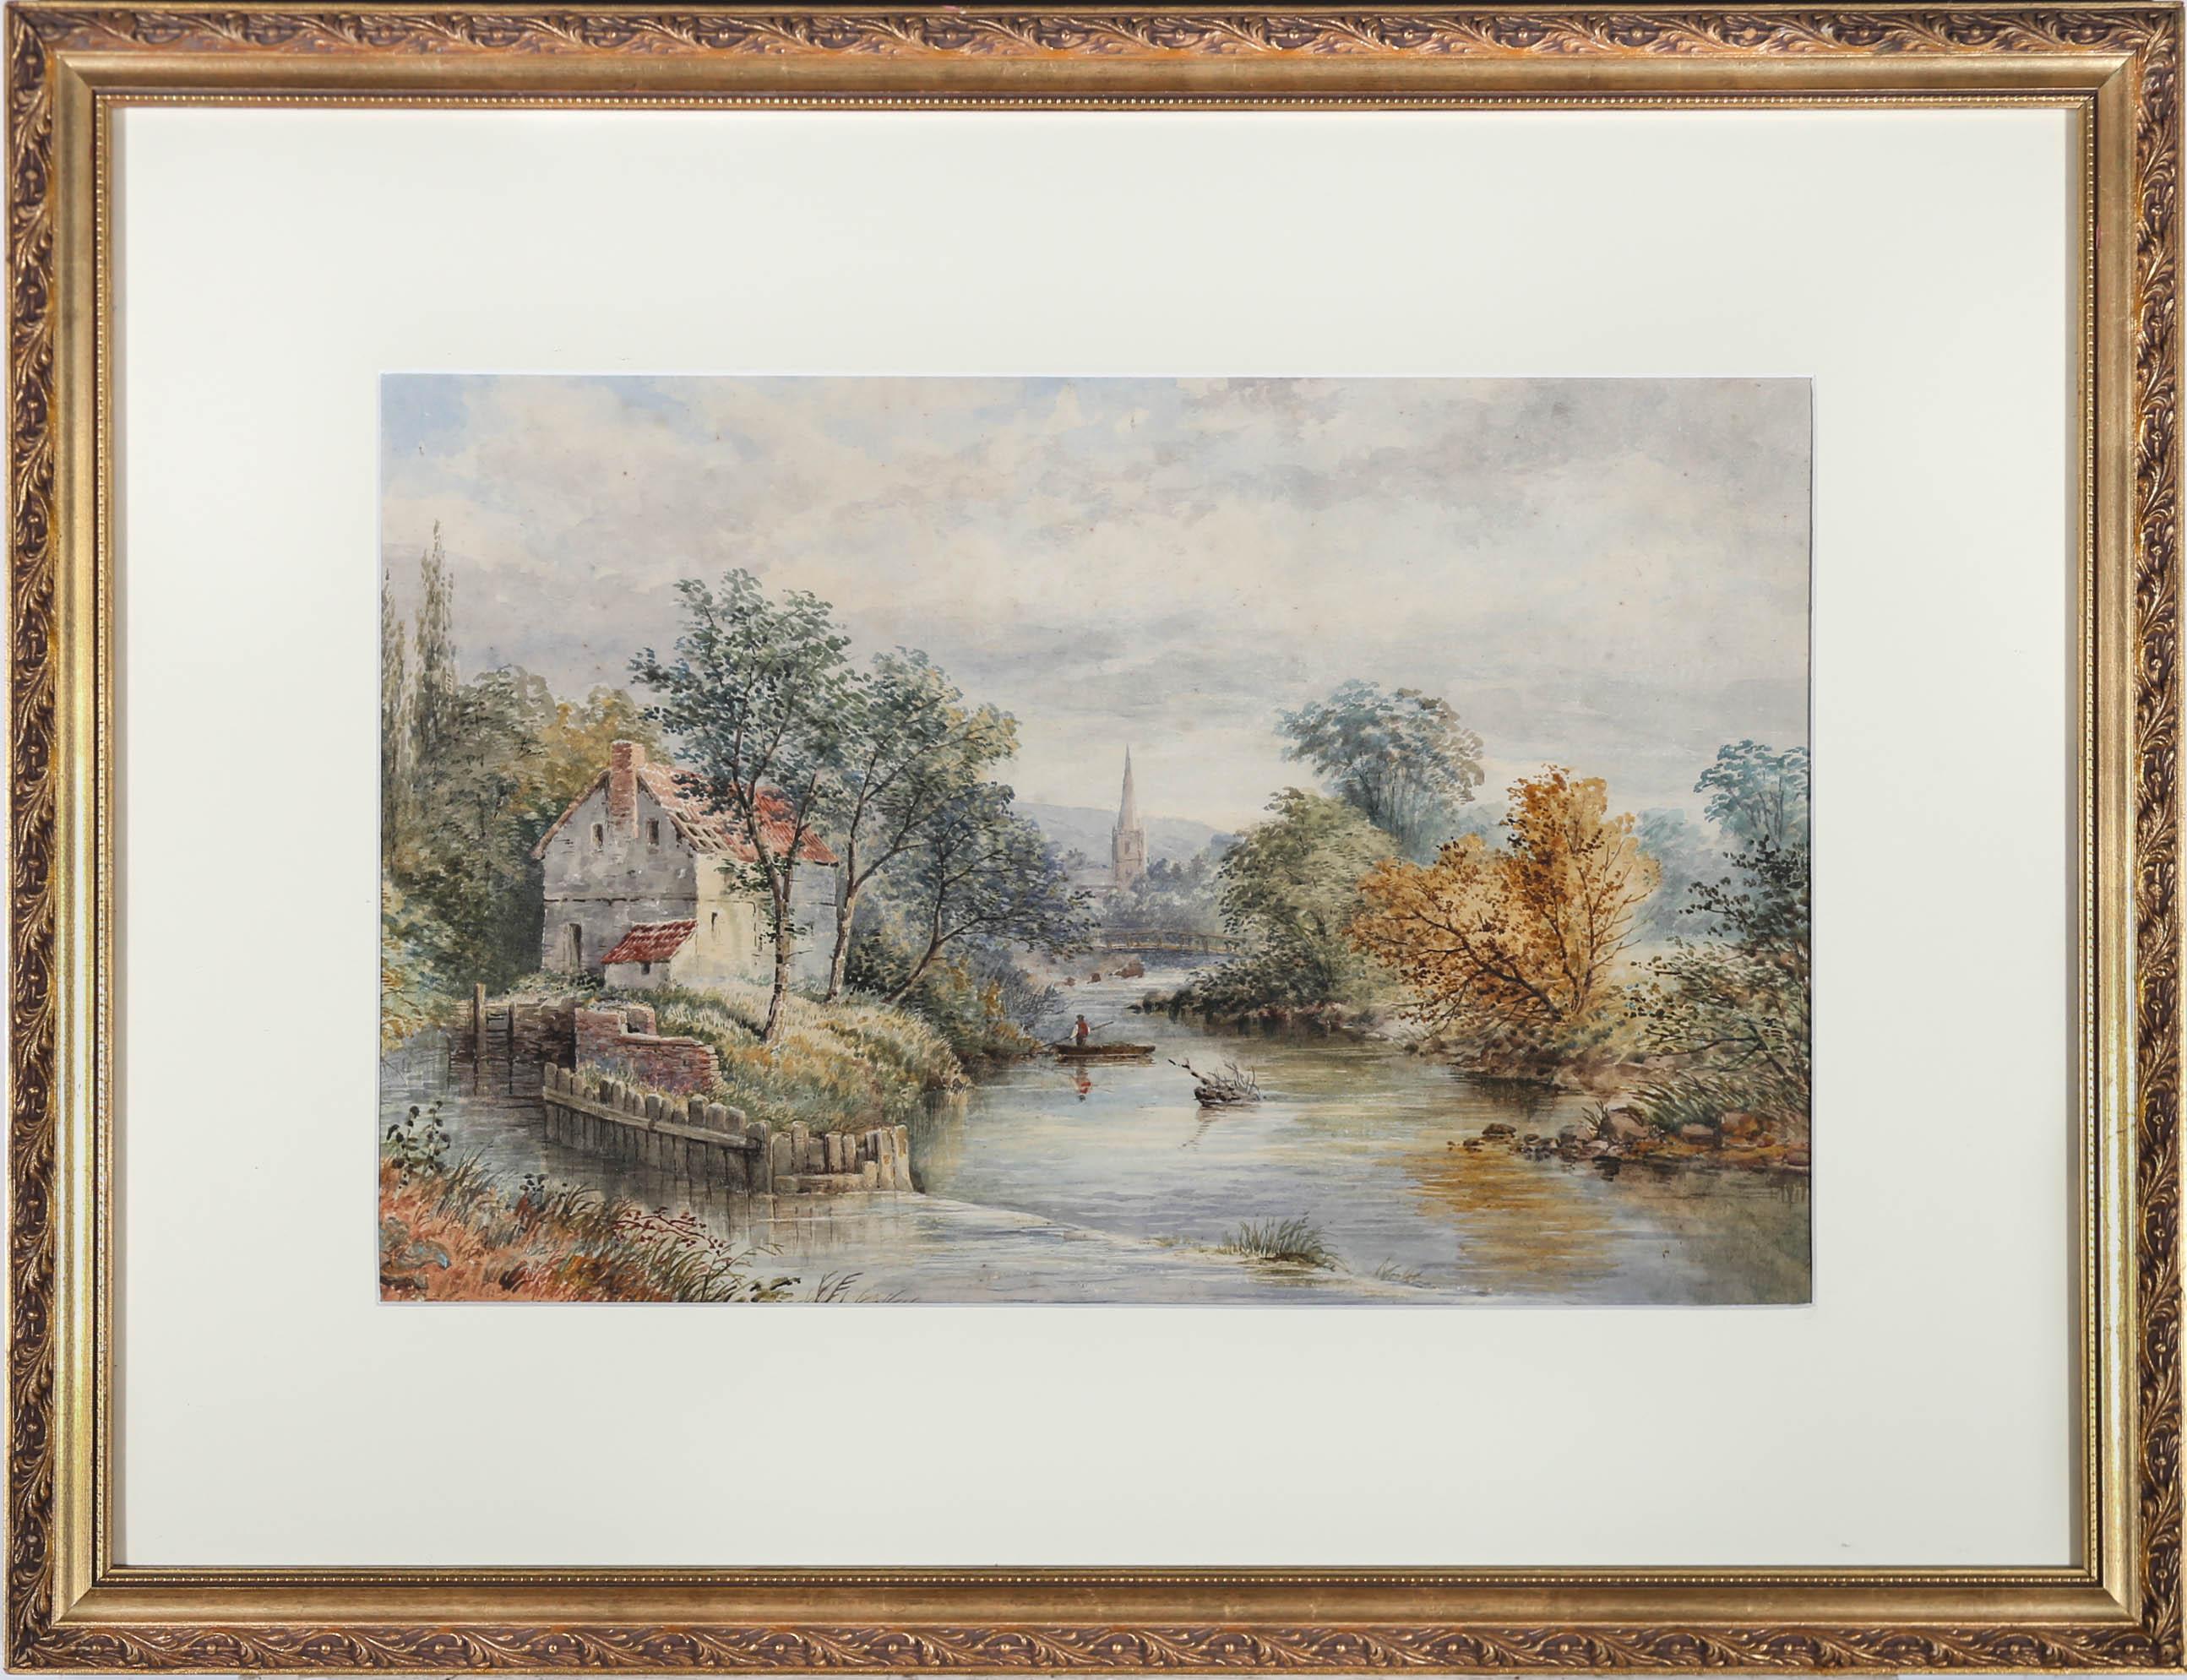 Unknown Landscape Art - 19th Century Watercolour - House On The Weir